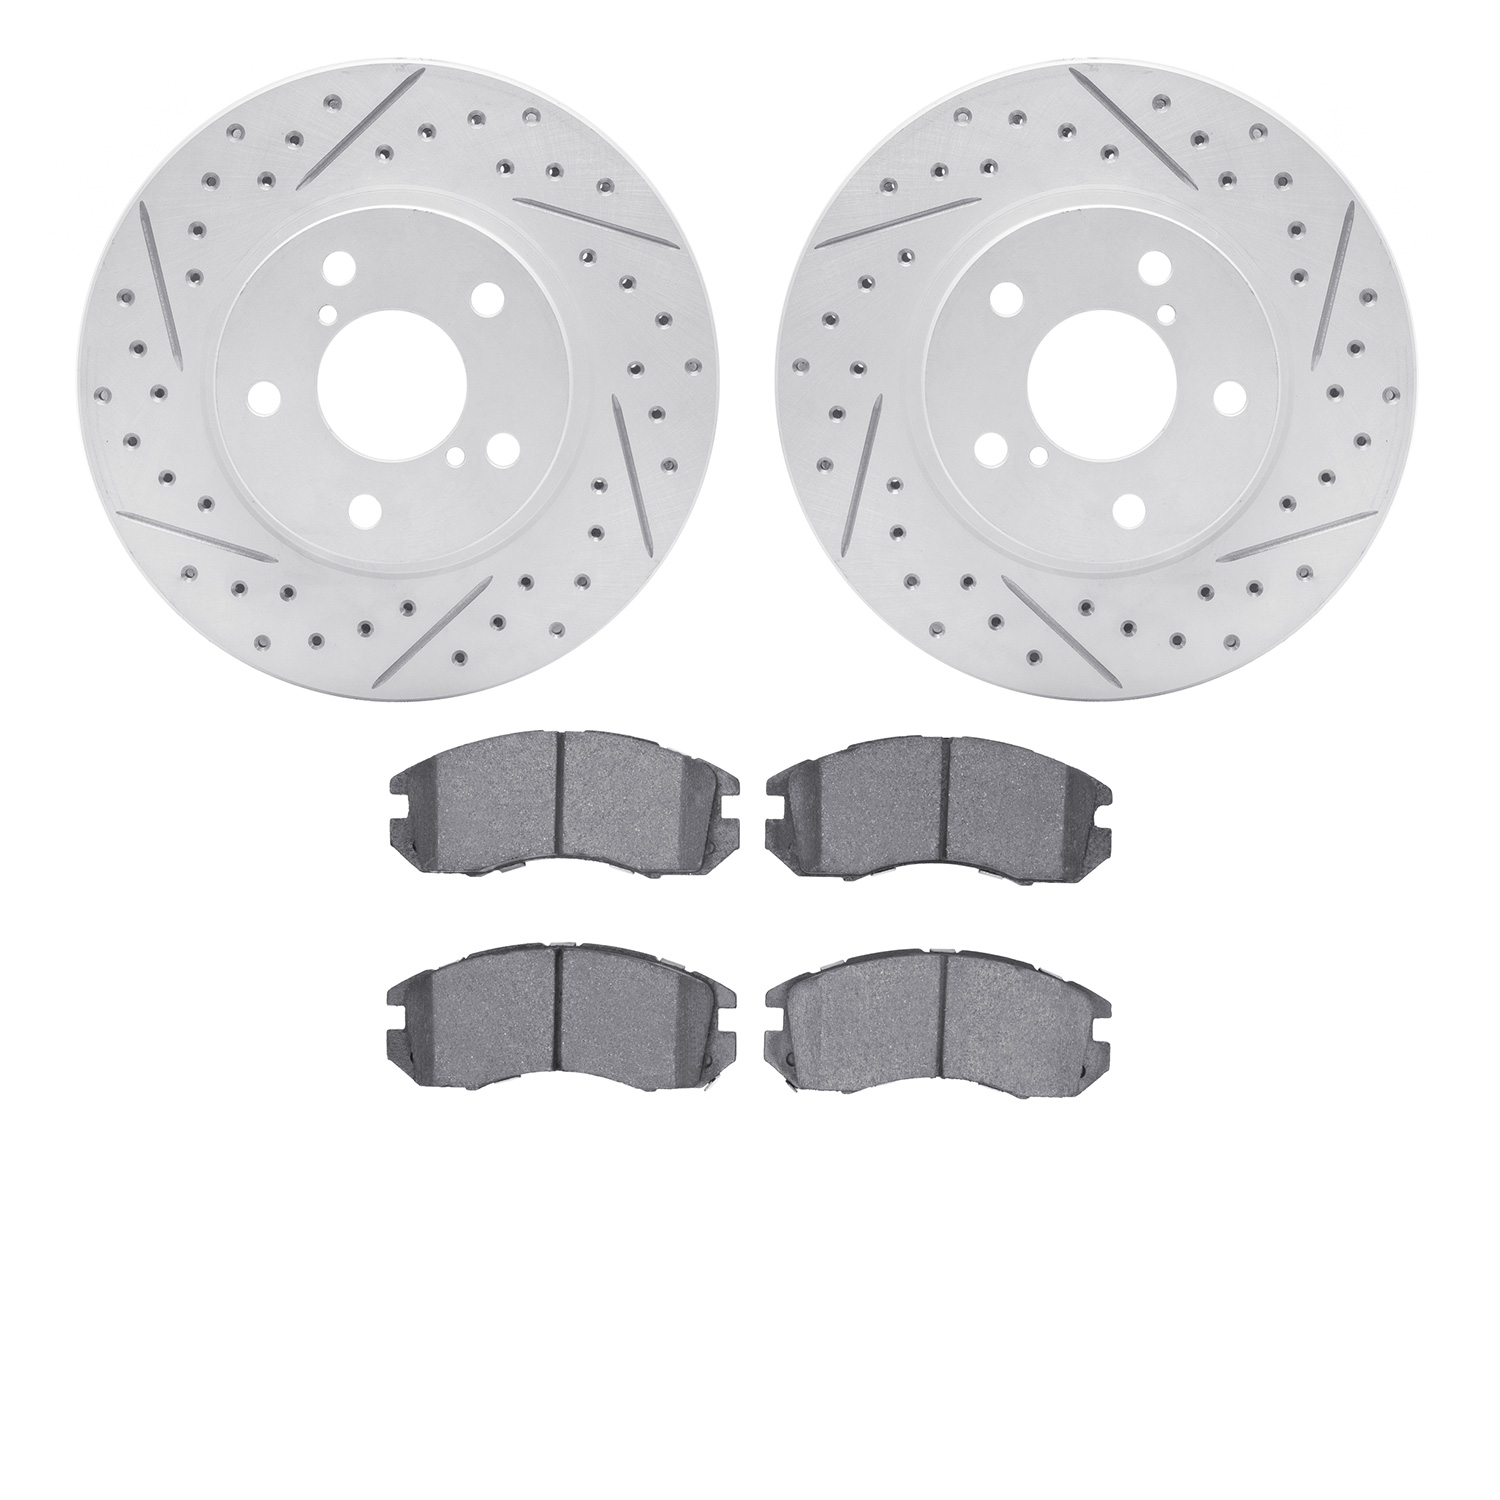 2502-13000 Geoperformance Drilled/Slotted Rotors w/5000 Advanced Brake Pads Kit, 1990-1996 Subaru, Position: Front